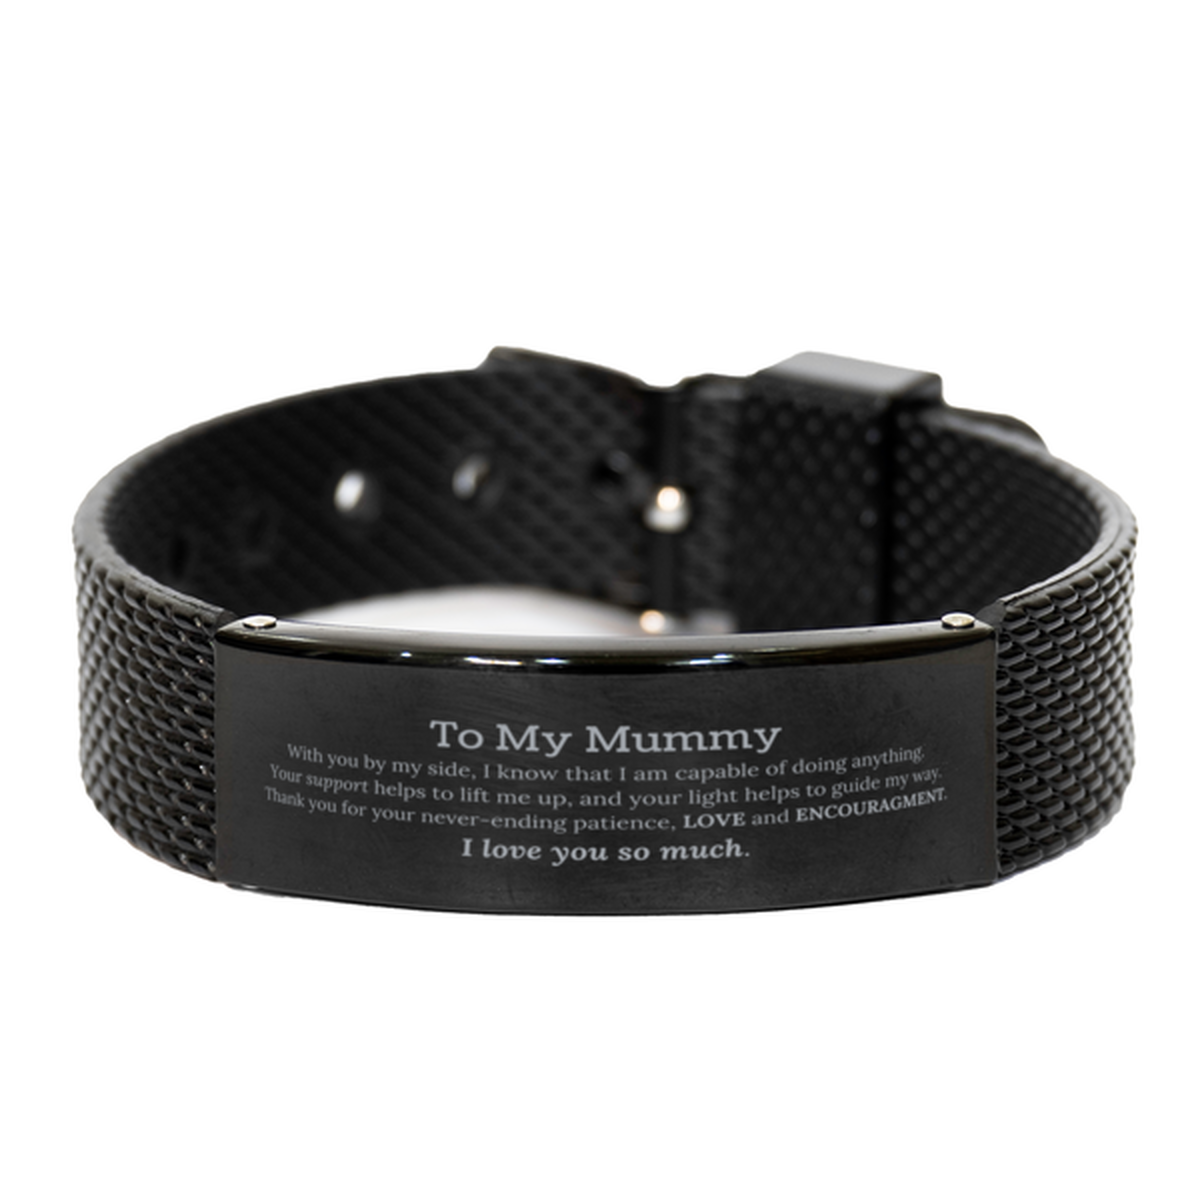 Appreciation Mummy Black Shark Mesh Bracelet Gifts, To My Mummy Birthday Christmas Wedding Keepsake Gifts for Mummy With you by my side, I know that I am capable of doing anything. I love you so much